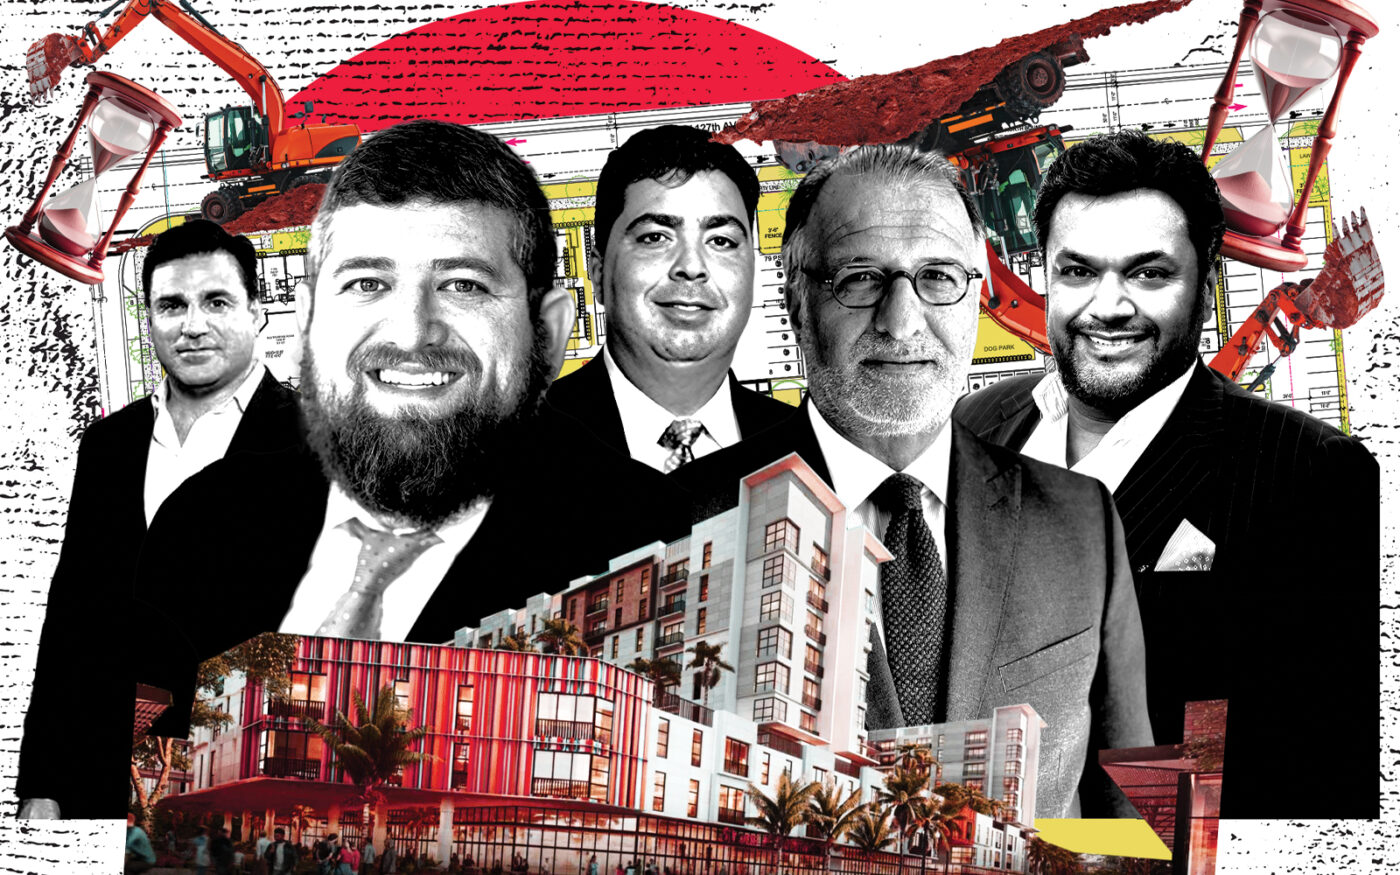 Left, from left: Royal Palm Companies' Dan Kodsi, Forman Capital's Ben Jacobson, Shadi Shomar, Immocorp Capital’s Gilbert Benhamou and Associated Builders and Contractors’ Florida East Coast Chapter's Sonny Maken along with a rendering of the Northwood Square project in West Palm Beach (front) and a rendering of a planned Onyx Housing Group apartment project near Naranja (Photo-illustration by Steven Dilakian/The Real Deal; Getty Images, Royal Palm Companies, Immocorp Capital, Onyx Housing Group, Behar Font & Partners, Kobi Karp)